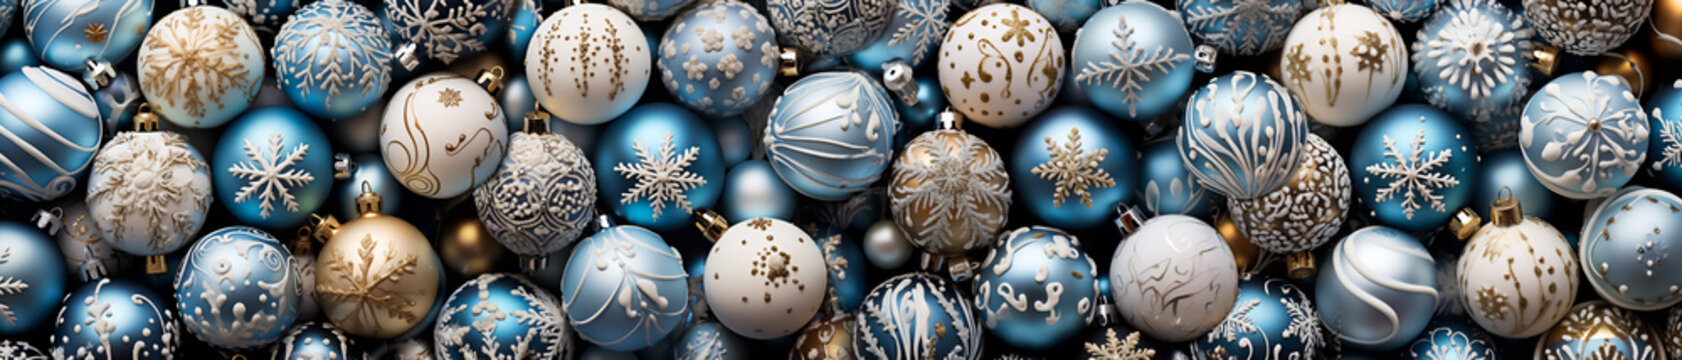 An image of different Christmas balls as a background. This image can be used as a greeting card or as a background for a holiday related website or advertisement.